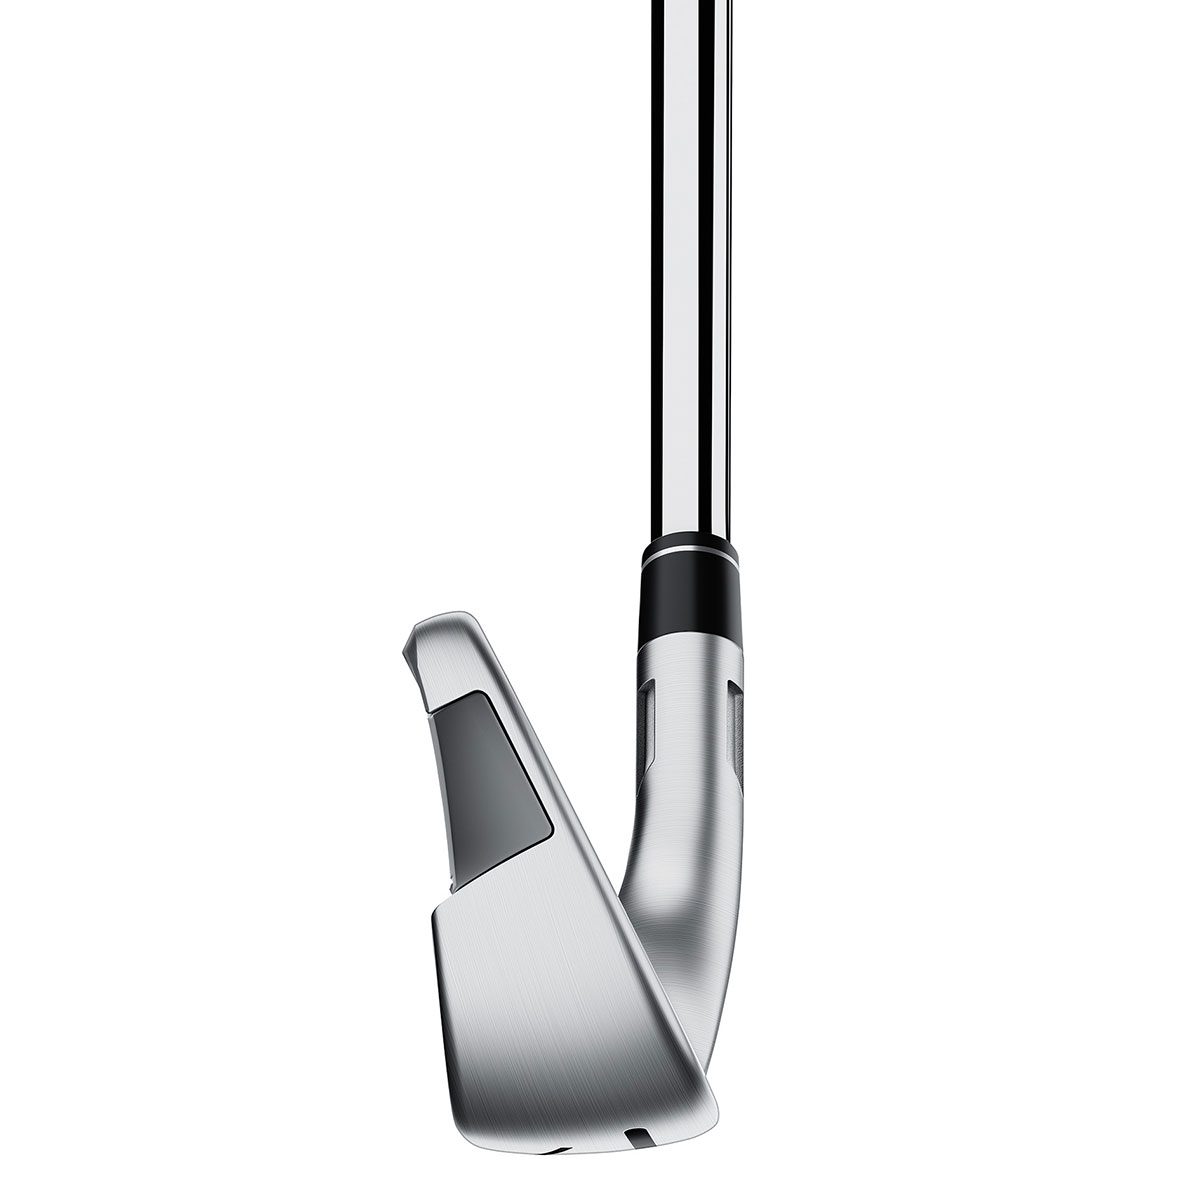 TaylorMade STEALTH Graphite Golf Irons from american golf